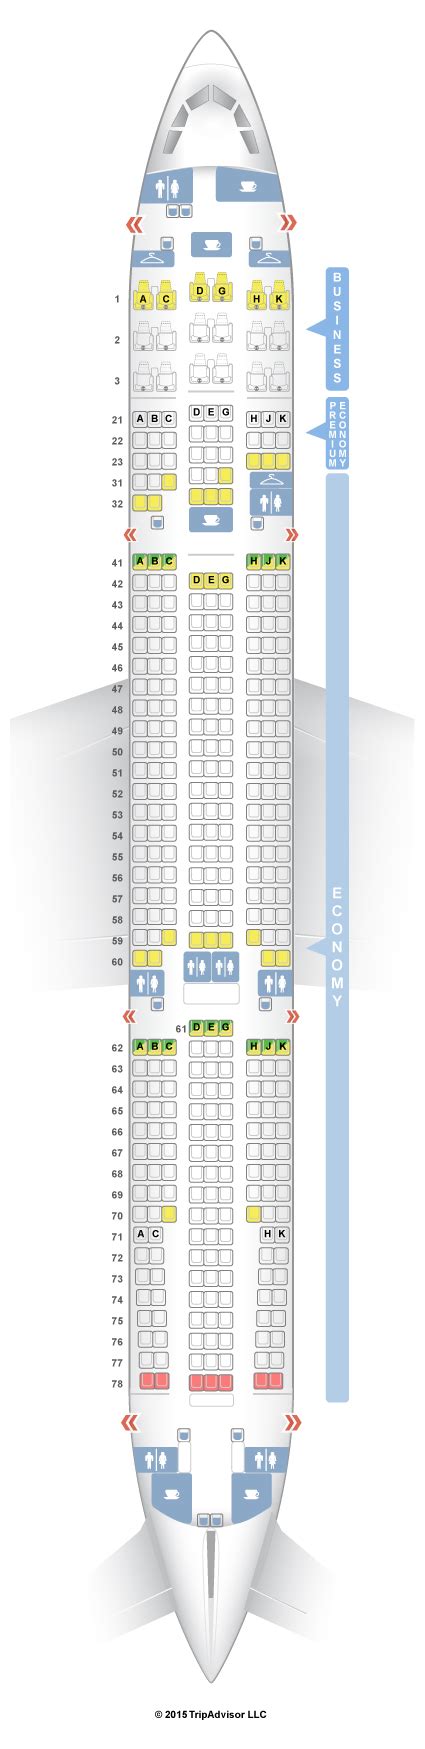 Philippine Airlines A Seat Map Elcho Table Vrogue Co